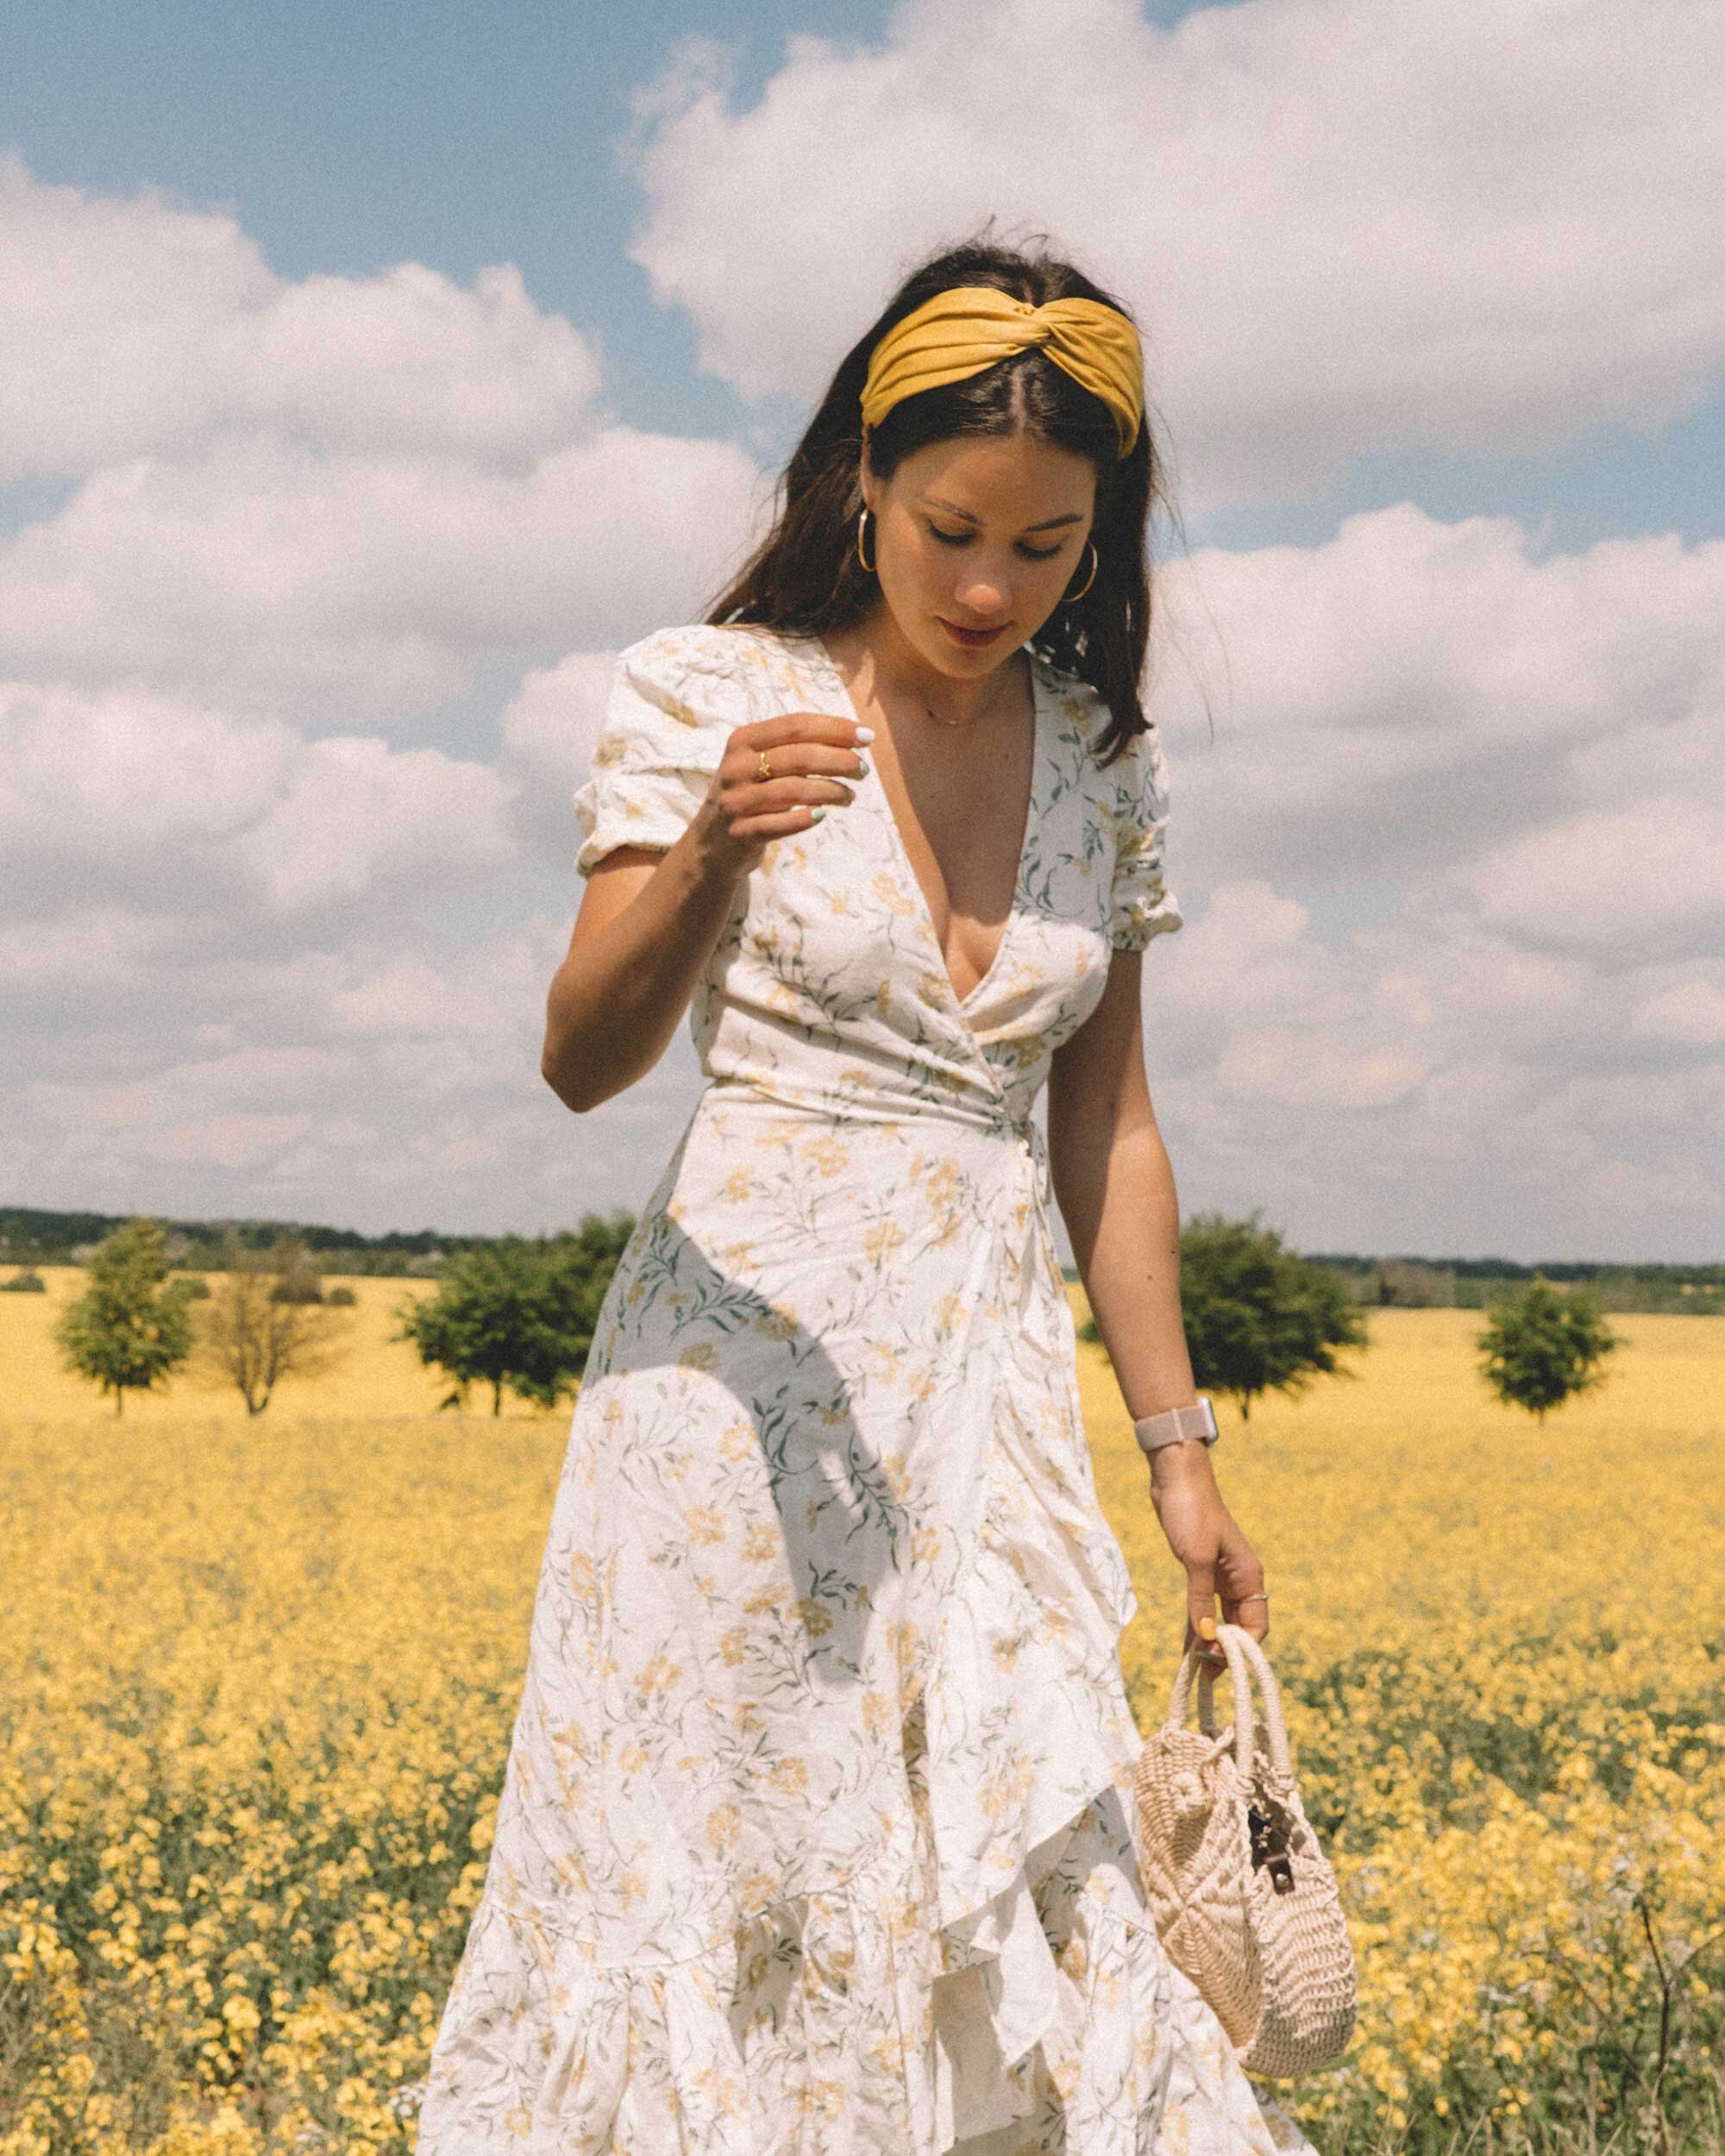 Sarah+Butler+of+Sarah+Styles+Seattle+wears+And+Other+Stories+Ruffled+Linen+Wrap+Midi+Dress+and+round+woven+bag+in+England+Countryside+for+the+perfect+floral+summer+dress+|+@sarahchristine+14.jpg